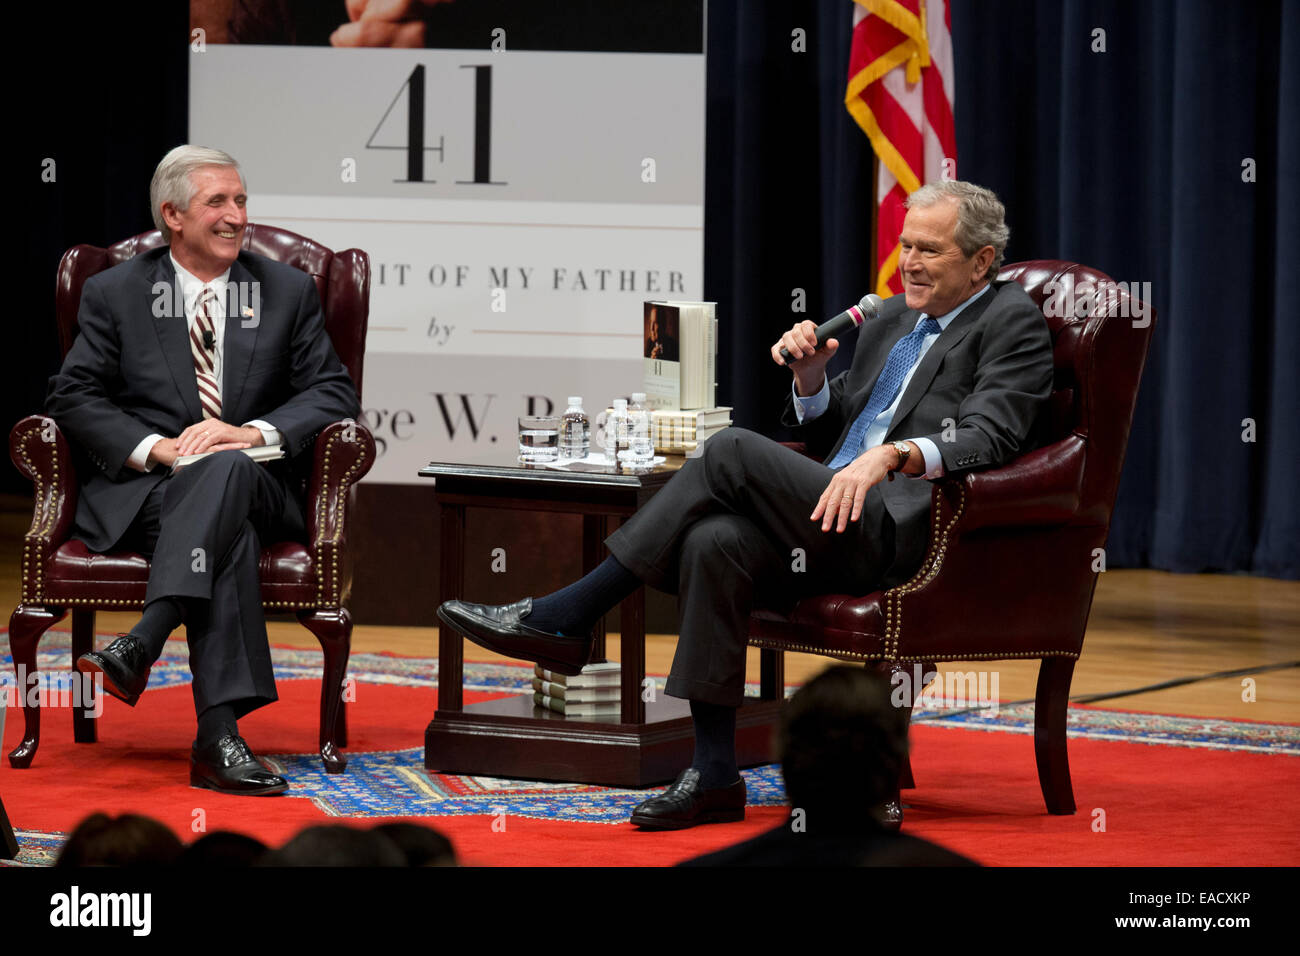 College Station, Texas, USA. 11th November, 2014. Former U.S. President George W. Bush, r,  talks about his new book, '41 A Portrait of My Father' wiith former chief of staff Andrew Card during a book event at the Bush Library at Texas A&M University. The elder George H.W. Bush and wife Barbara were in the audience. Credit:  Bob Daemmrich/Alamy Live News Stock Photo